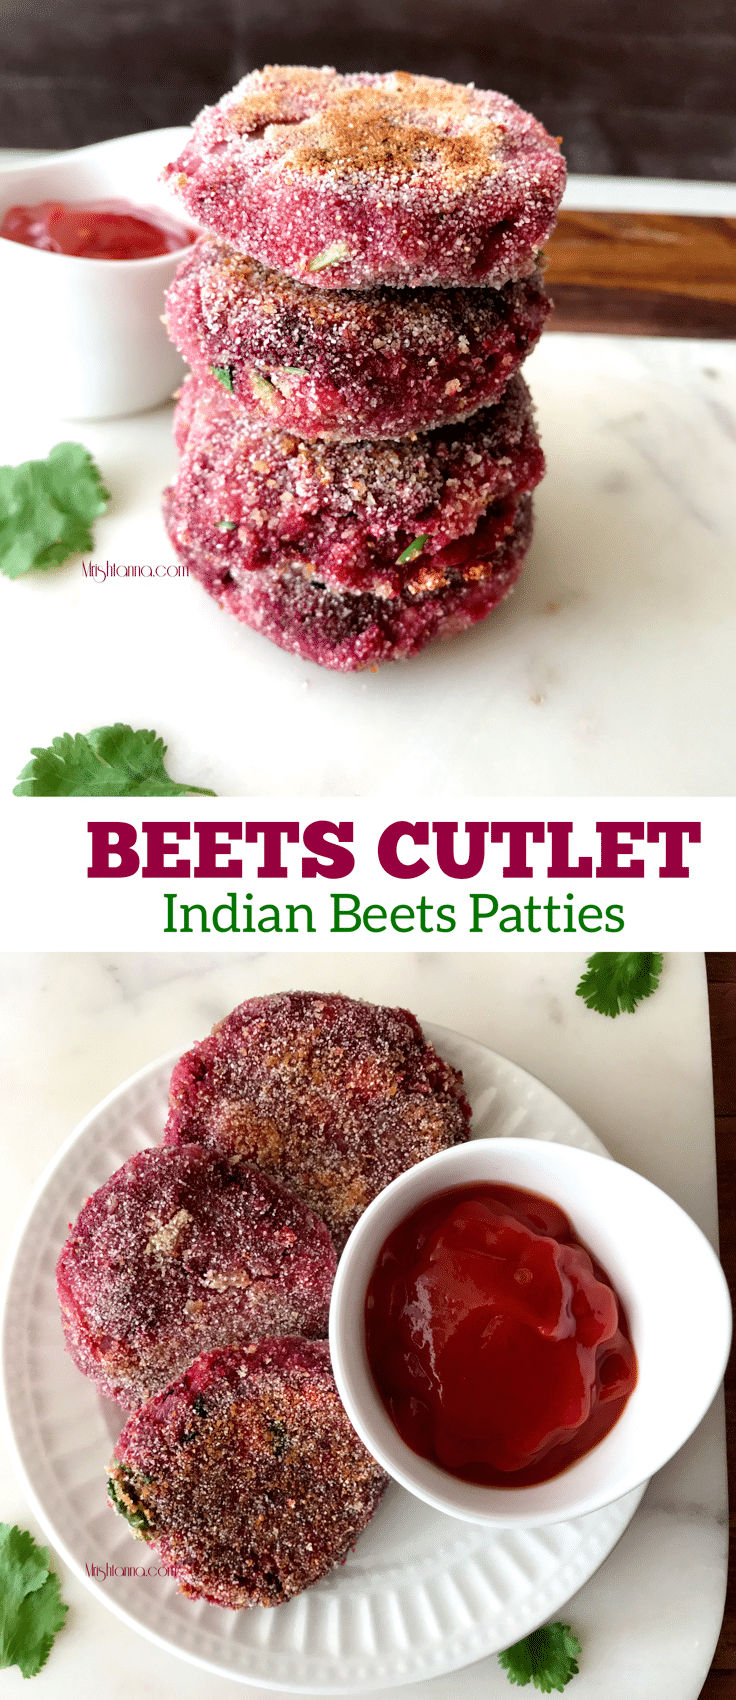 A close up of a piece of patties on a plate, with Cutlet and Beetroot